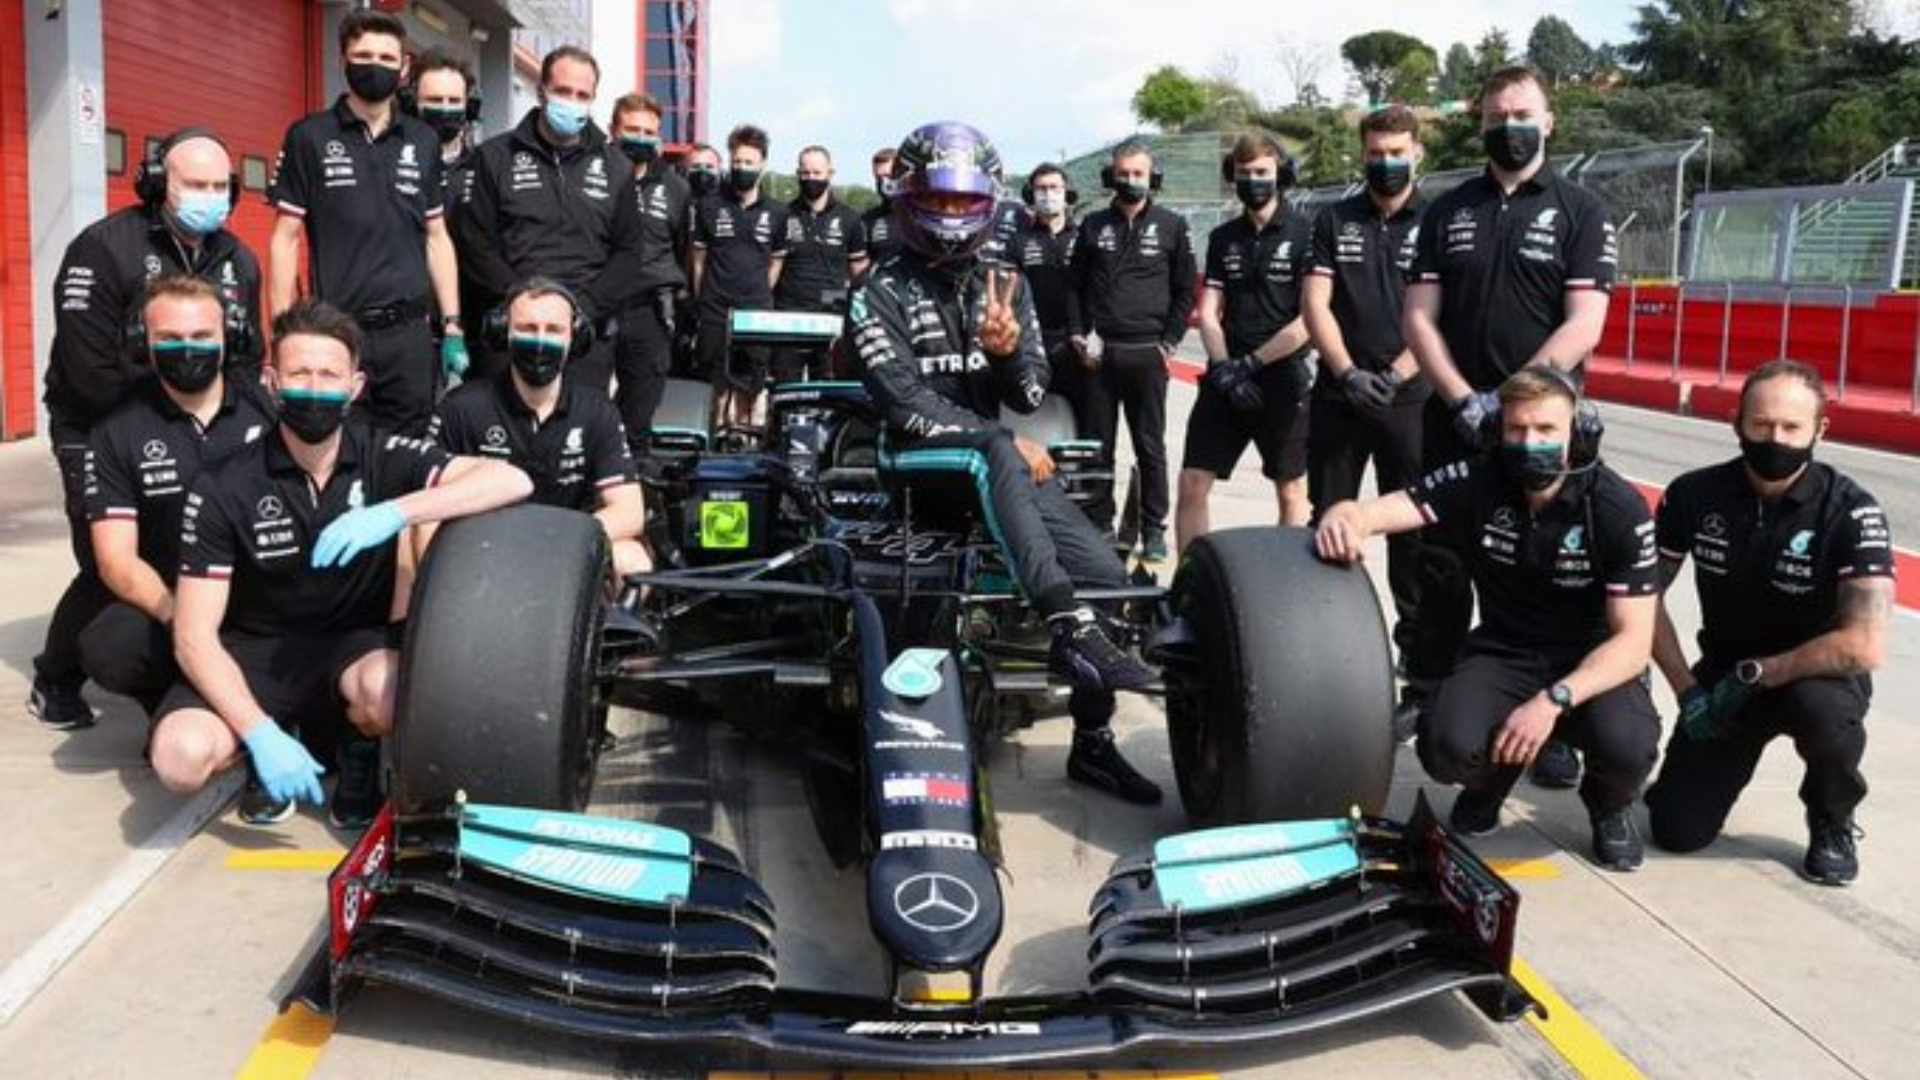 Mercedes has dominated the sport of Formula One and Lewis Hamilton is continuing the great work.